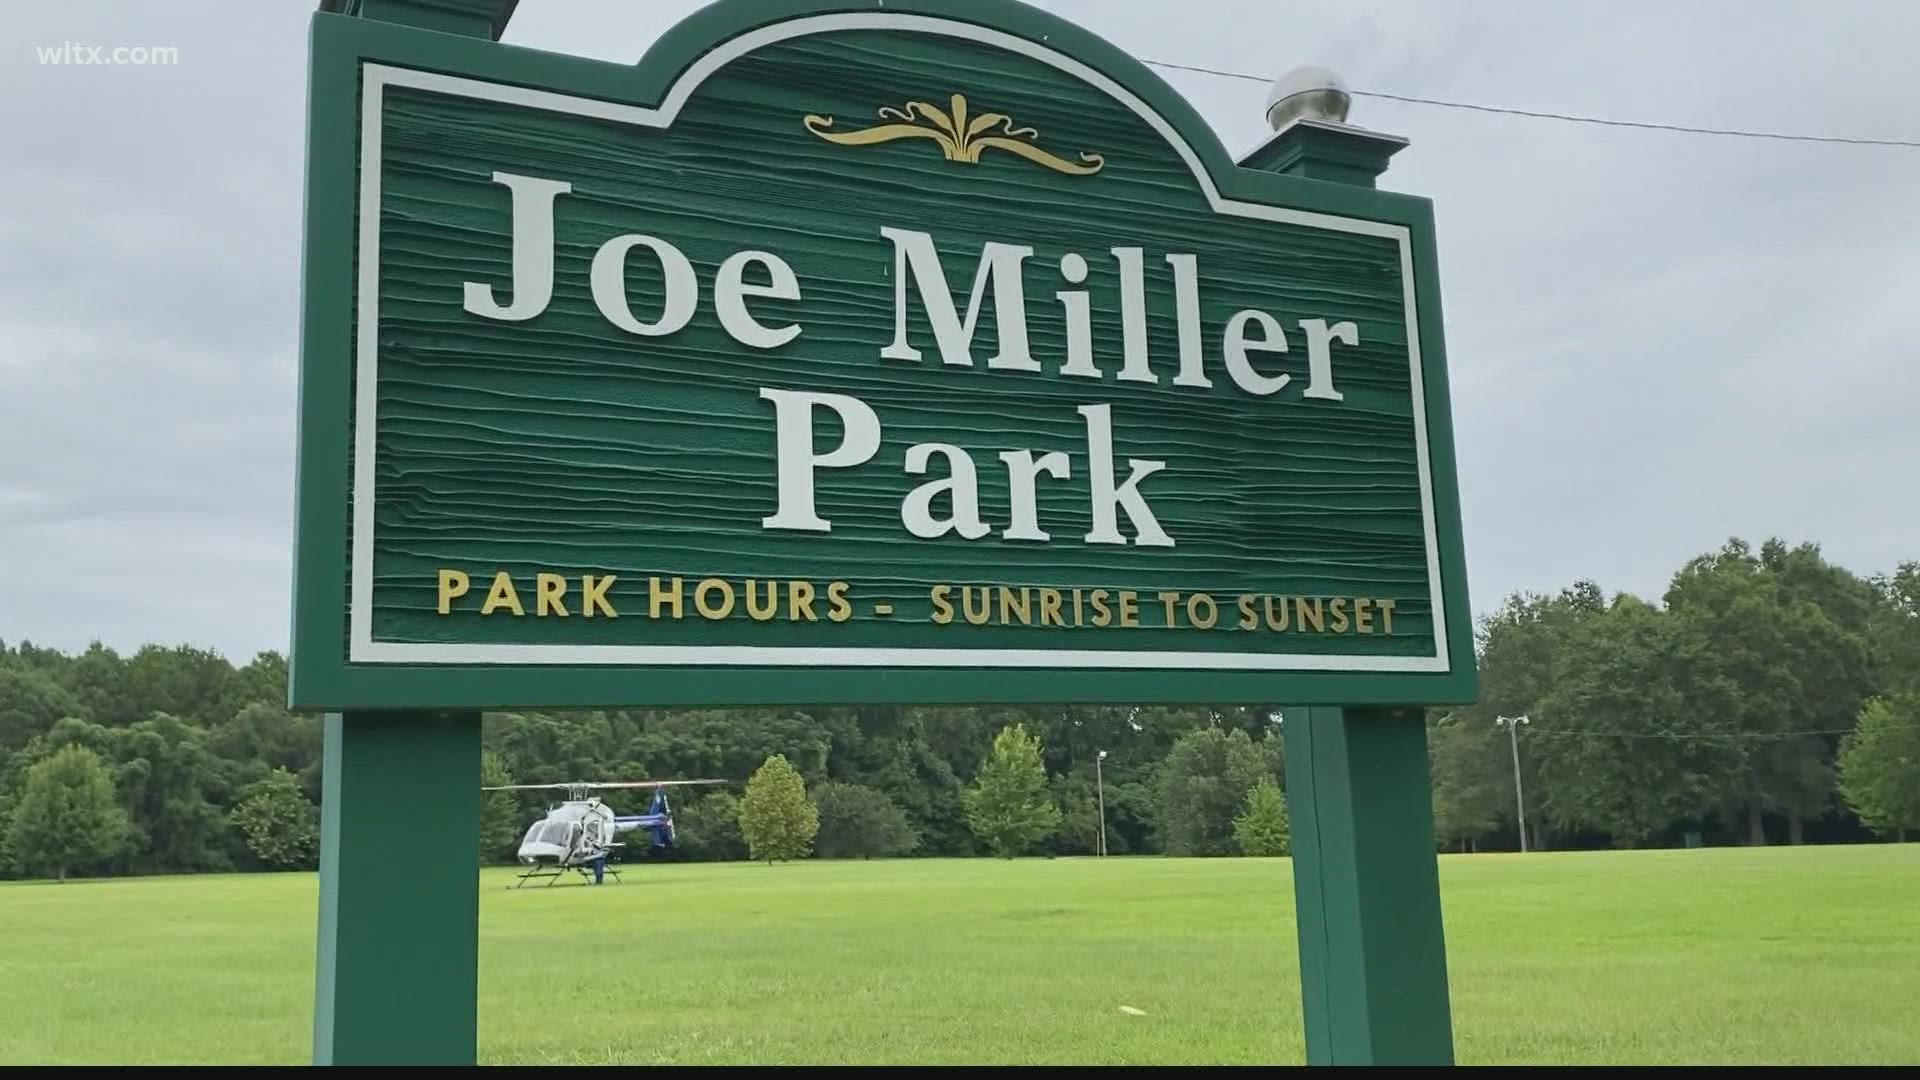 The town is encouraging food vendors to set up shot at Joe Miller park.